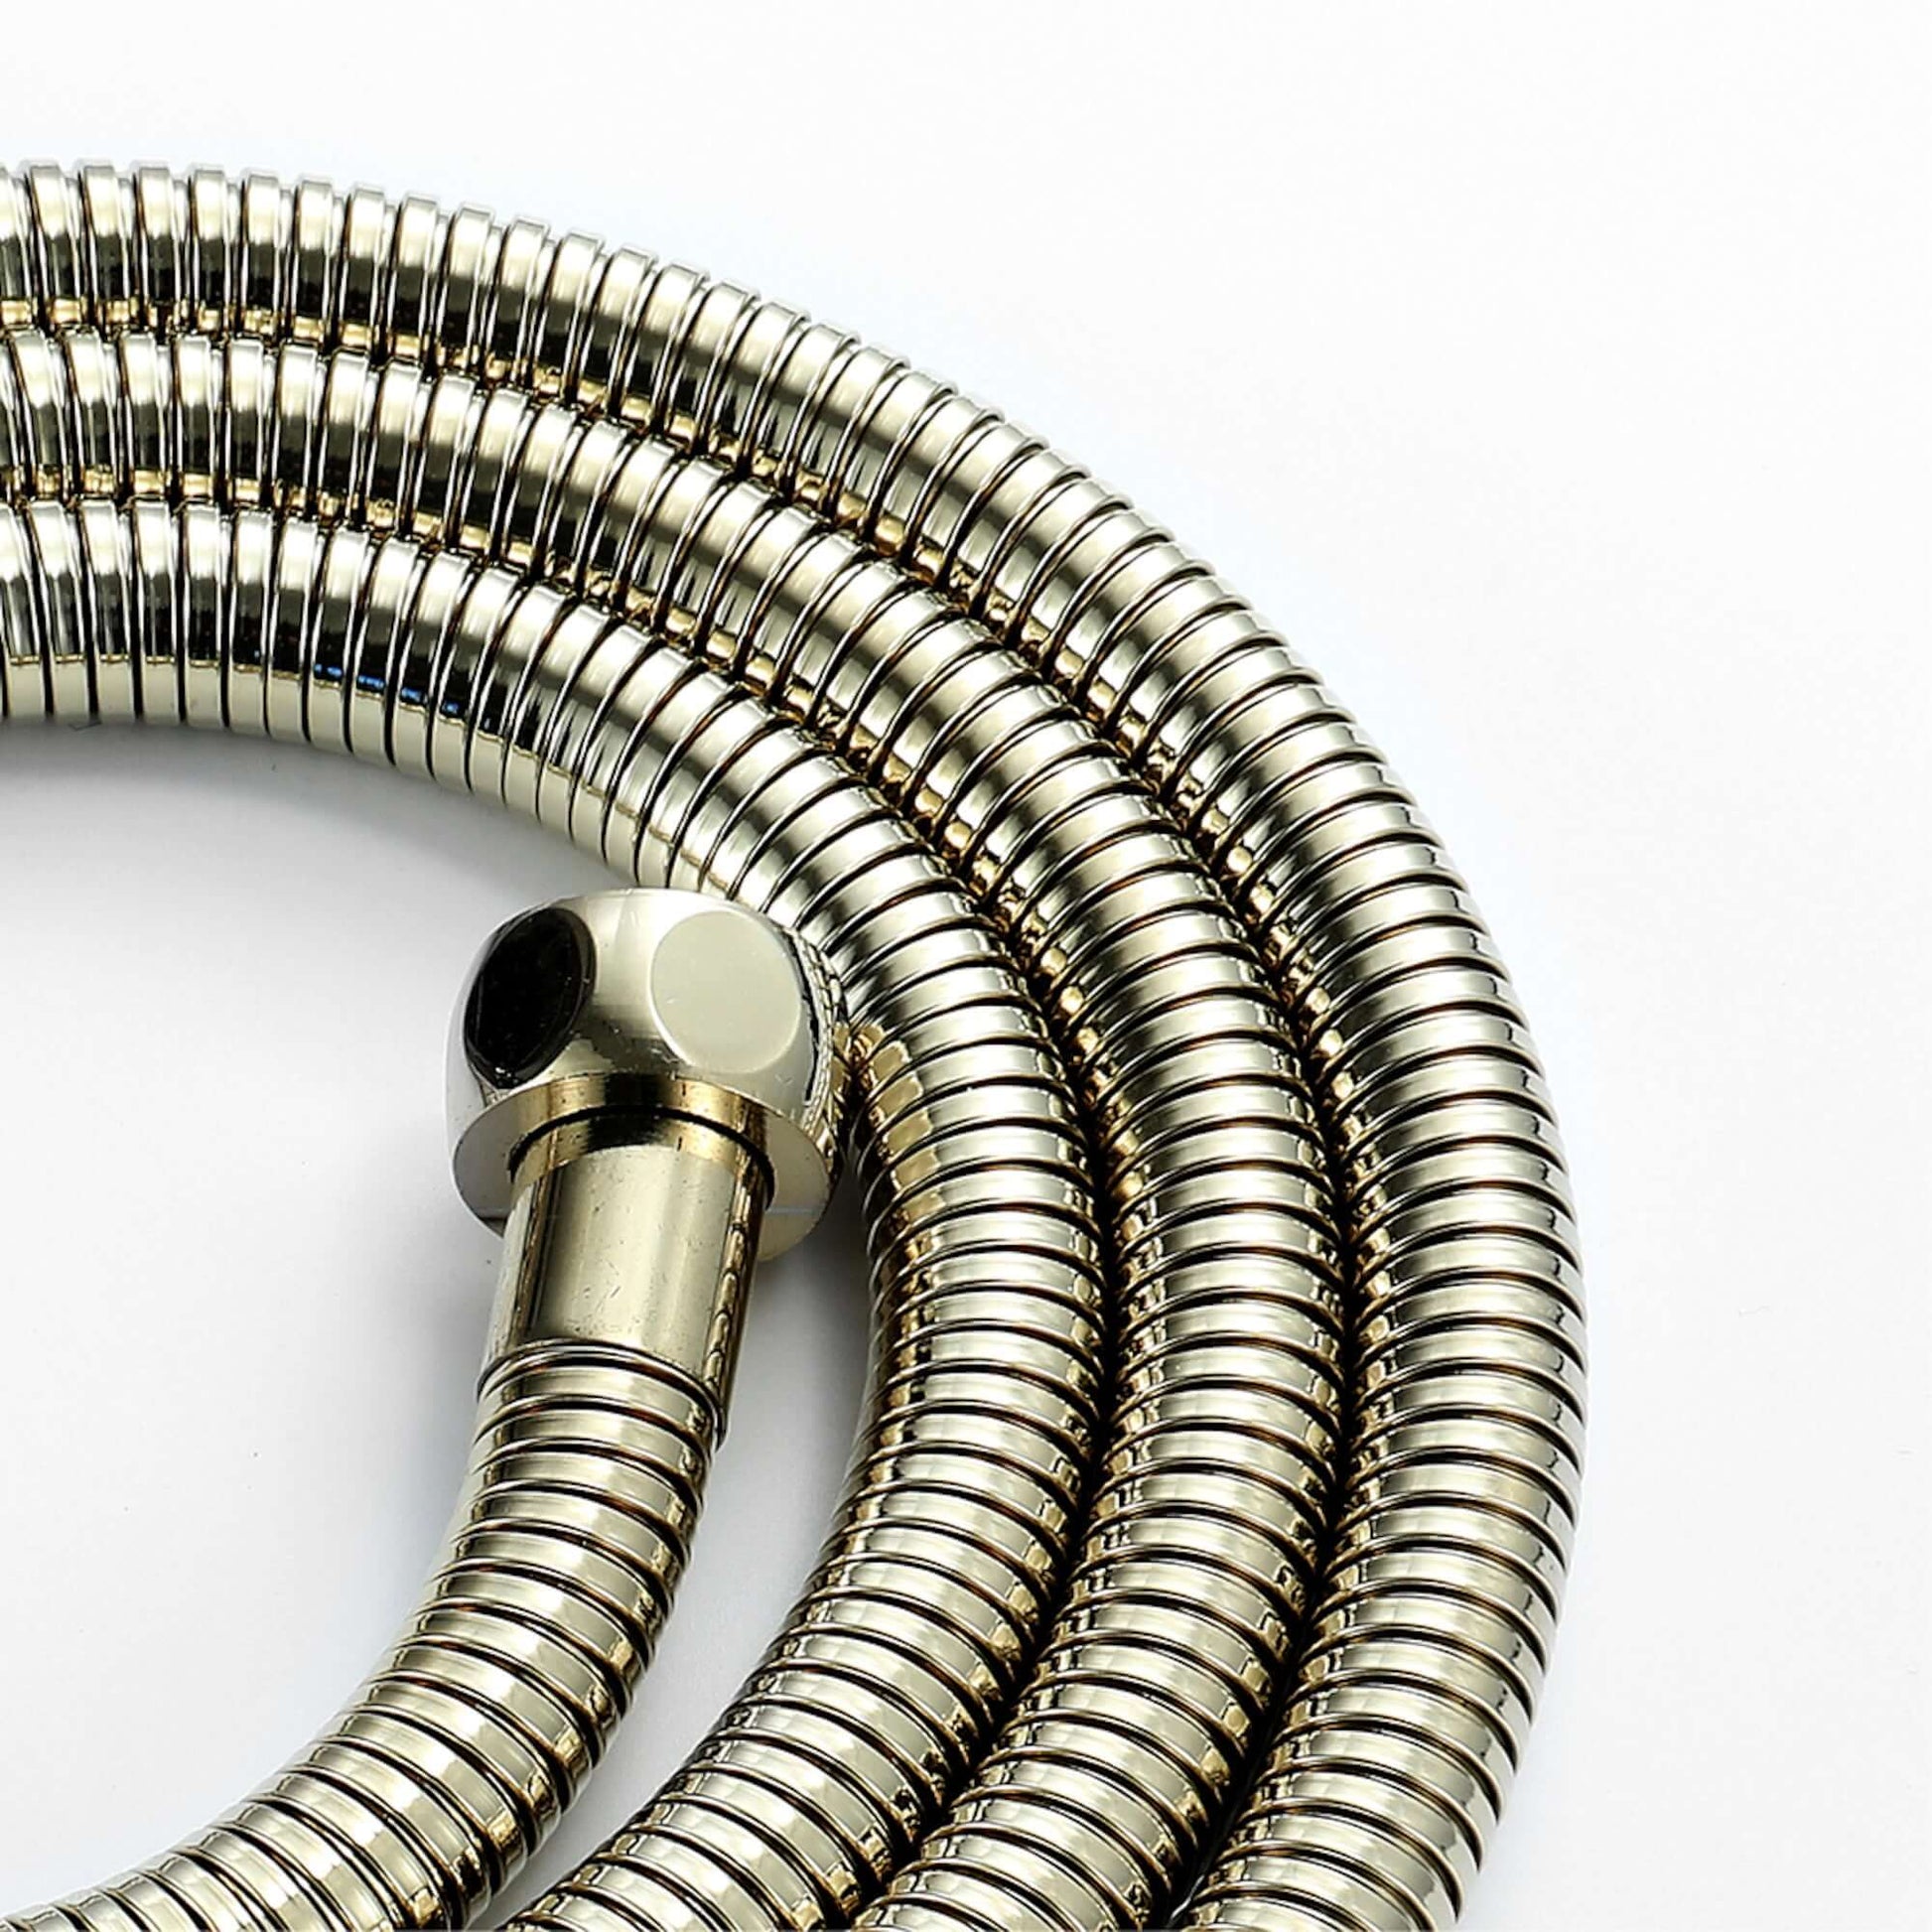 Flex shower hose stainless steel 1.75m standard bore - English gold - Showers